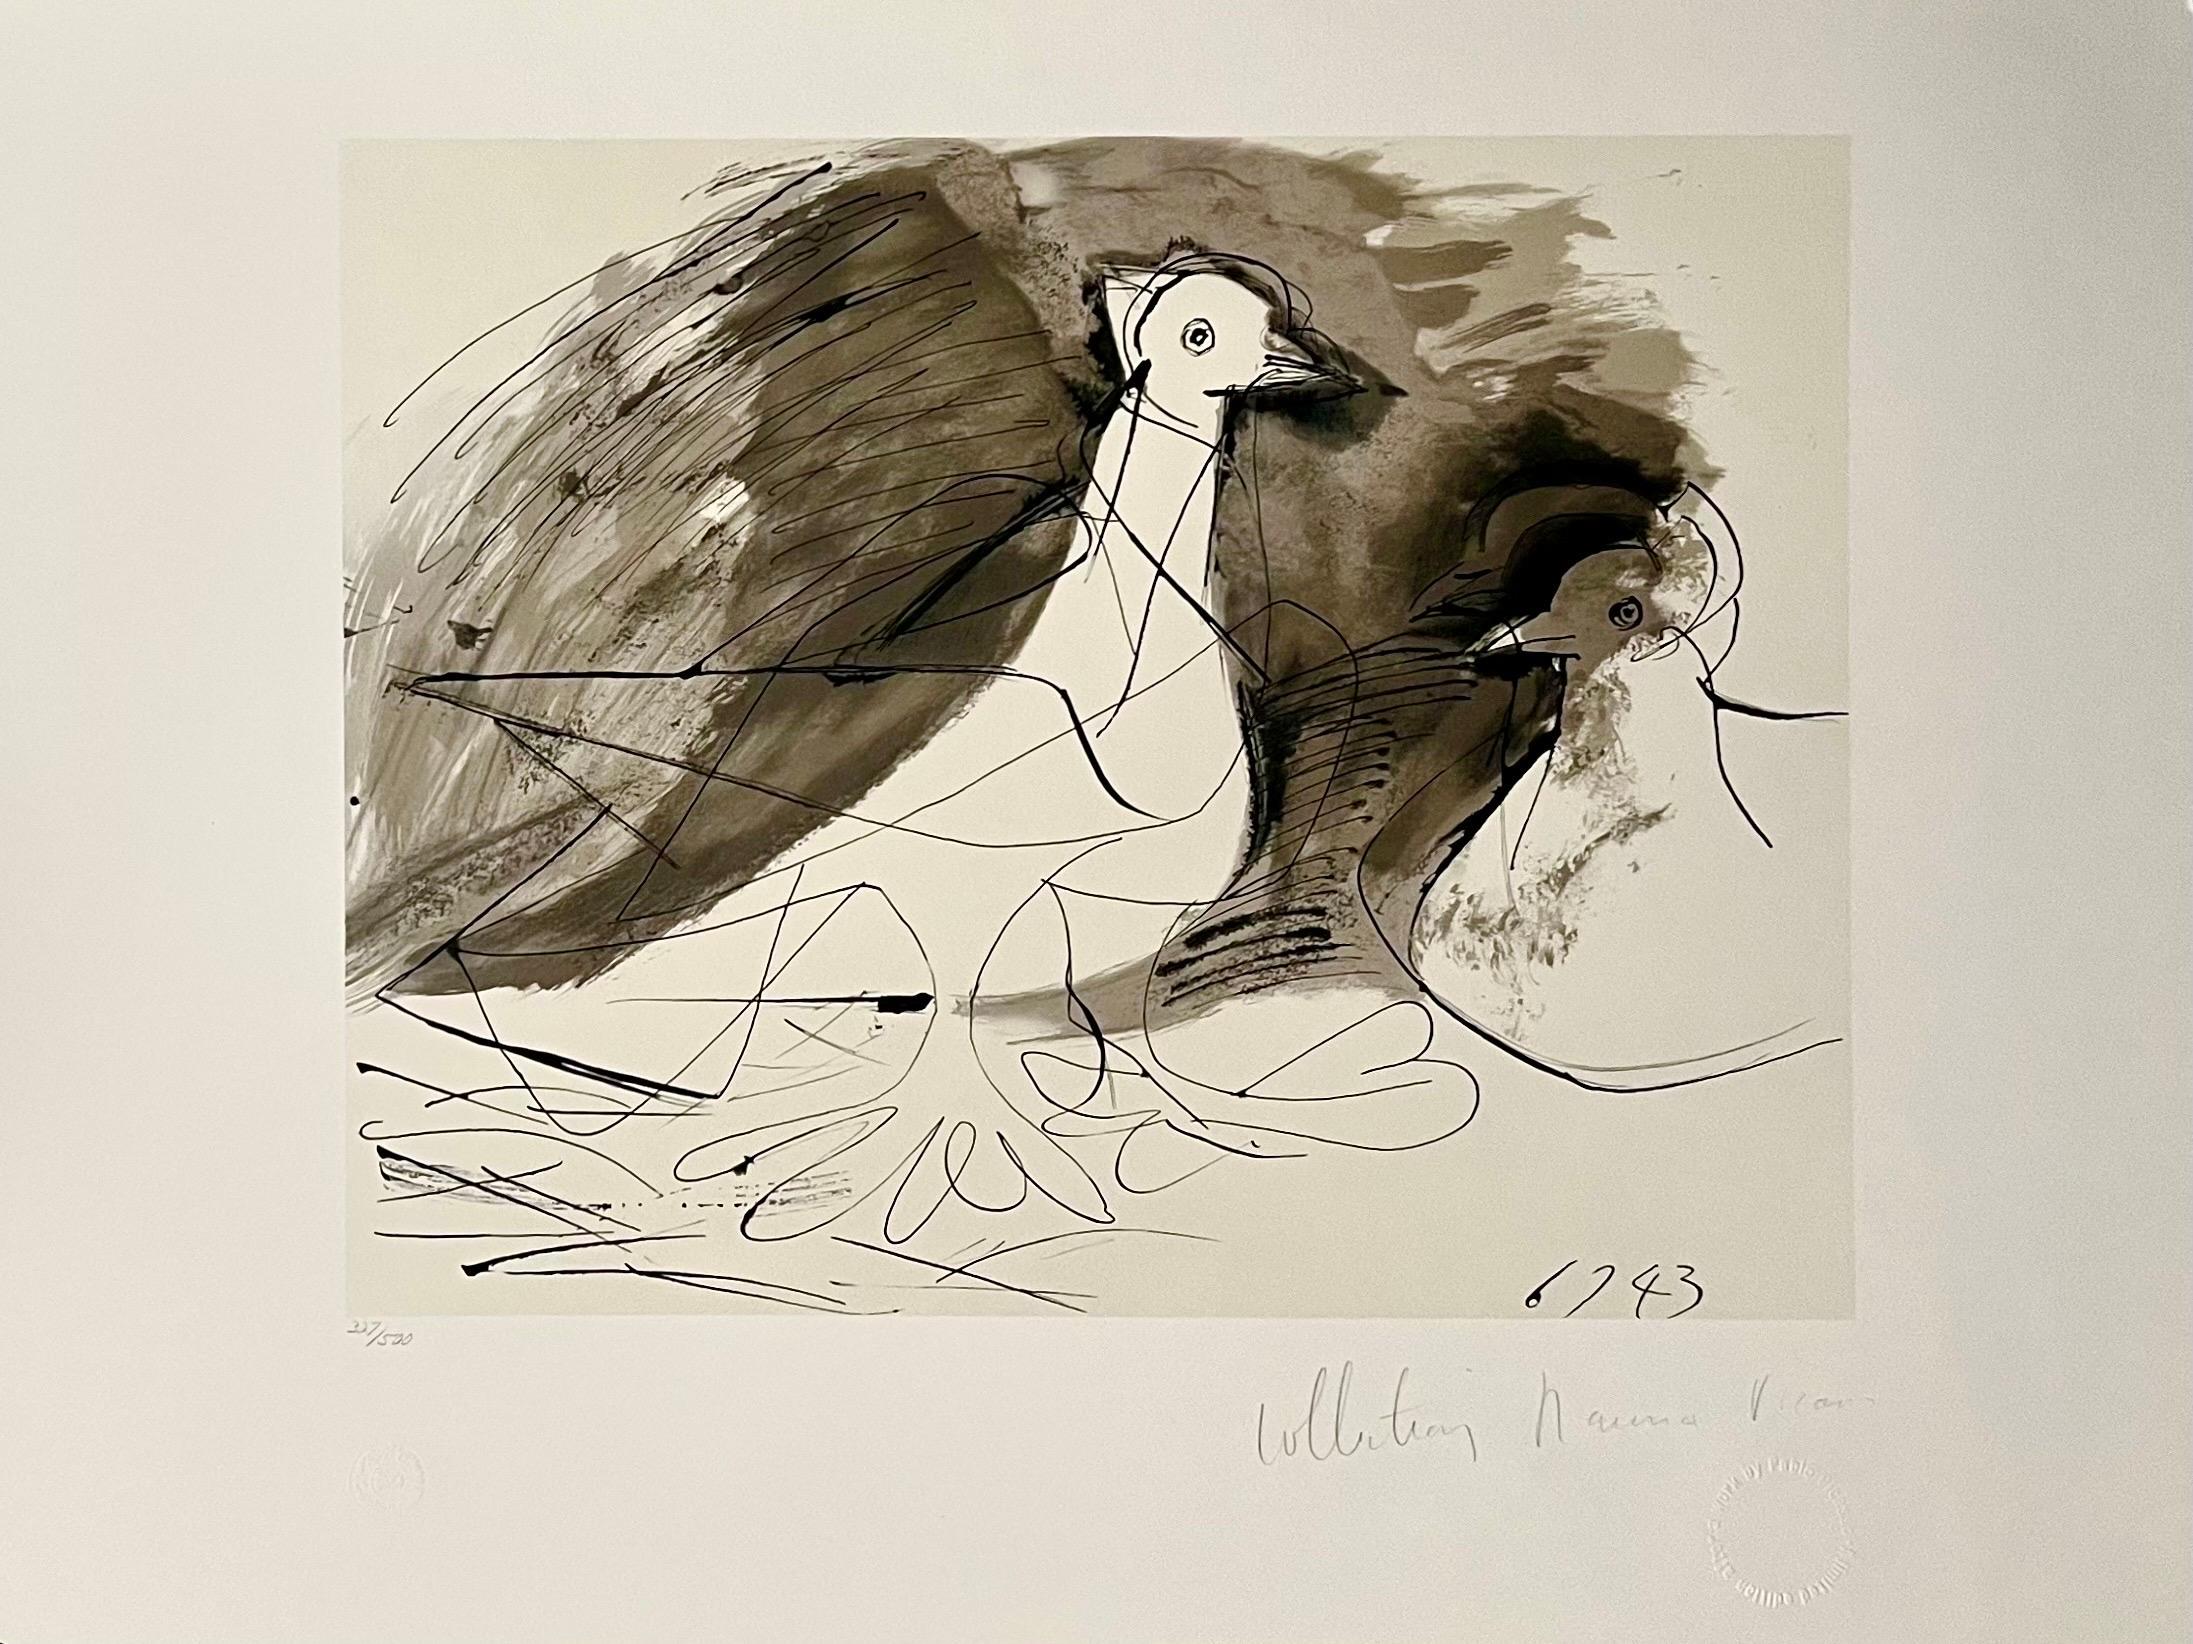 Pablo Picasso Estate Hand Signed Cubist Abstract Lithograph Pigeons Doves, Birds - Print by (after) Pablo Picasso